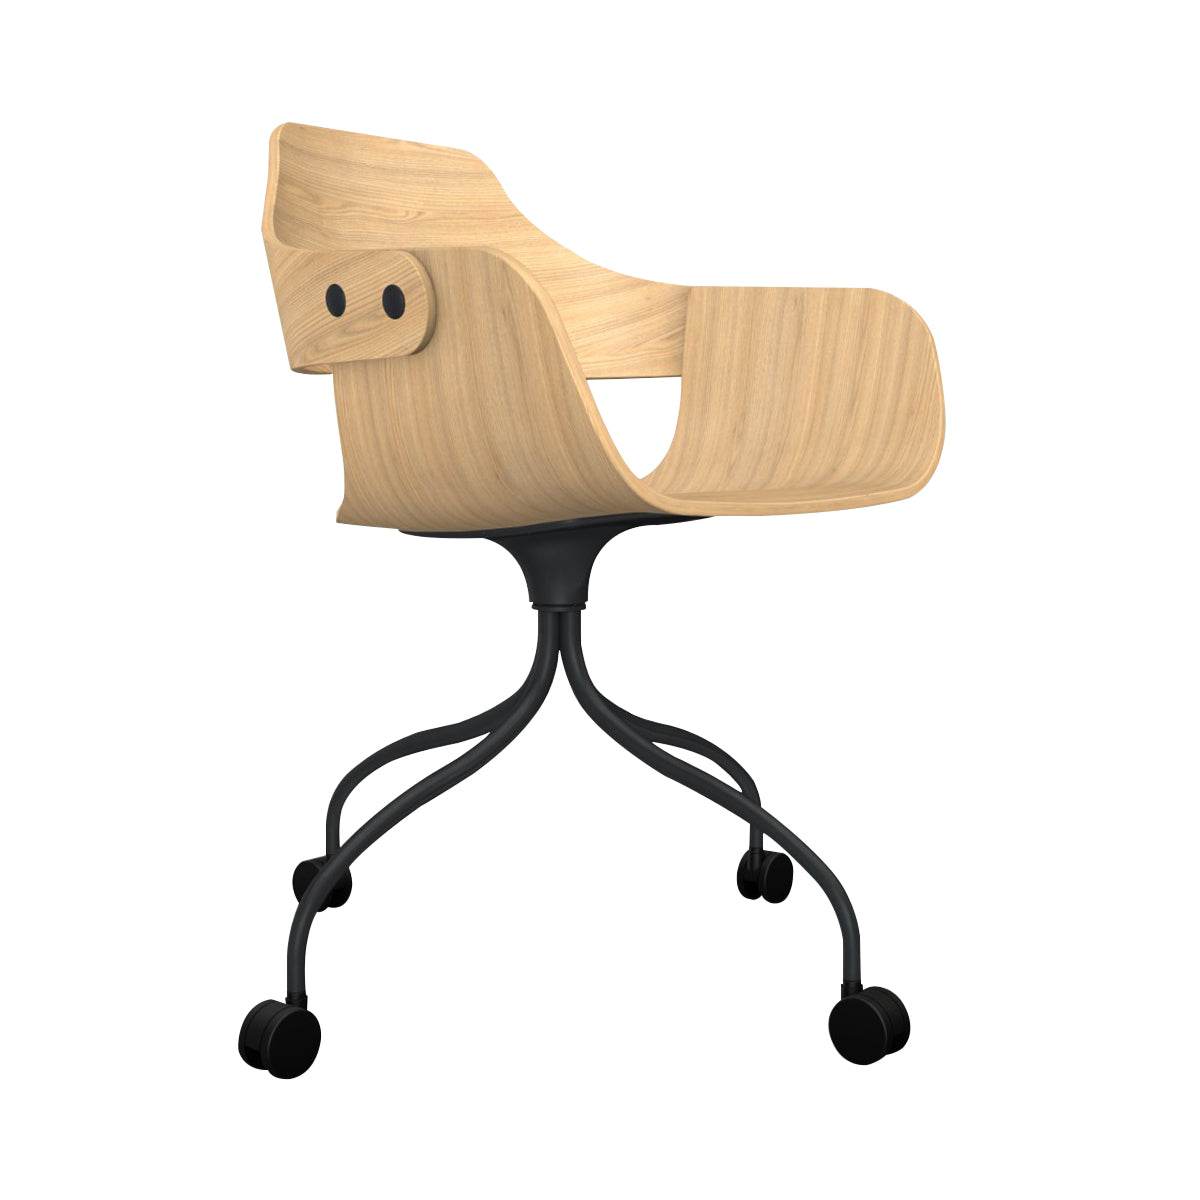 Showtime Chair with Wheel: Ash Stained Oak + Anthracite Grey